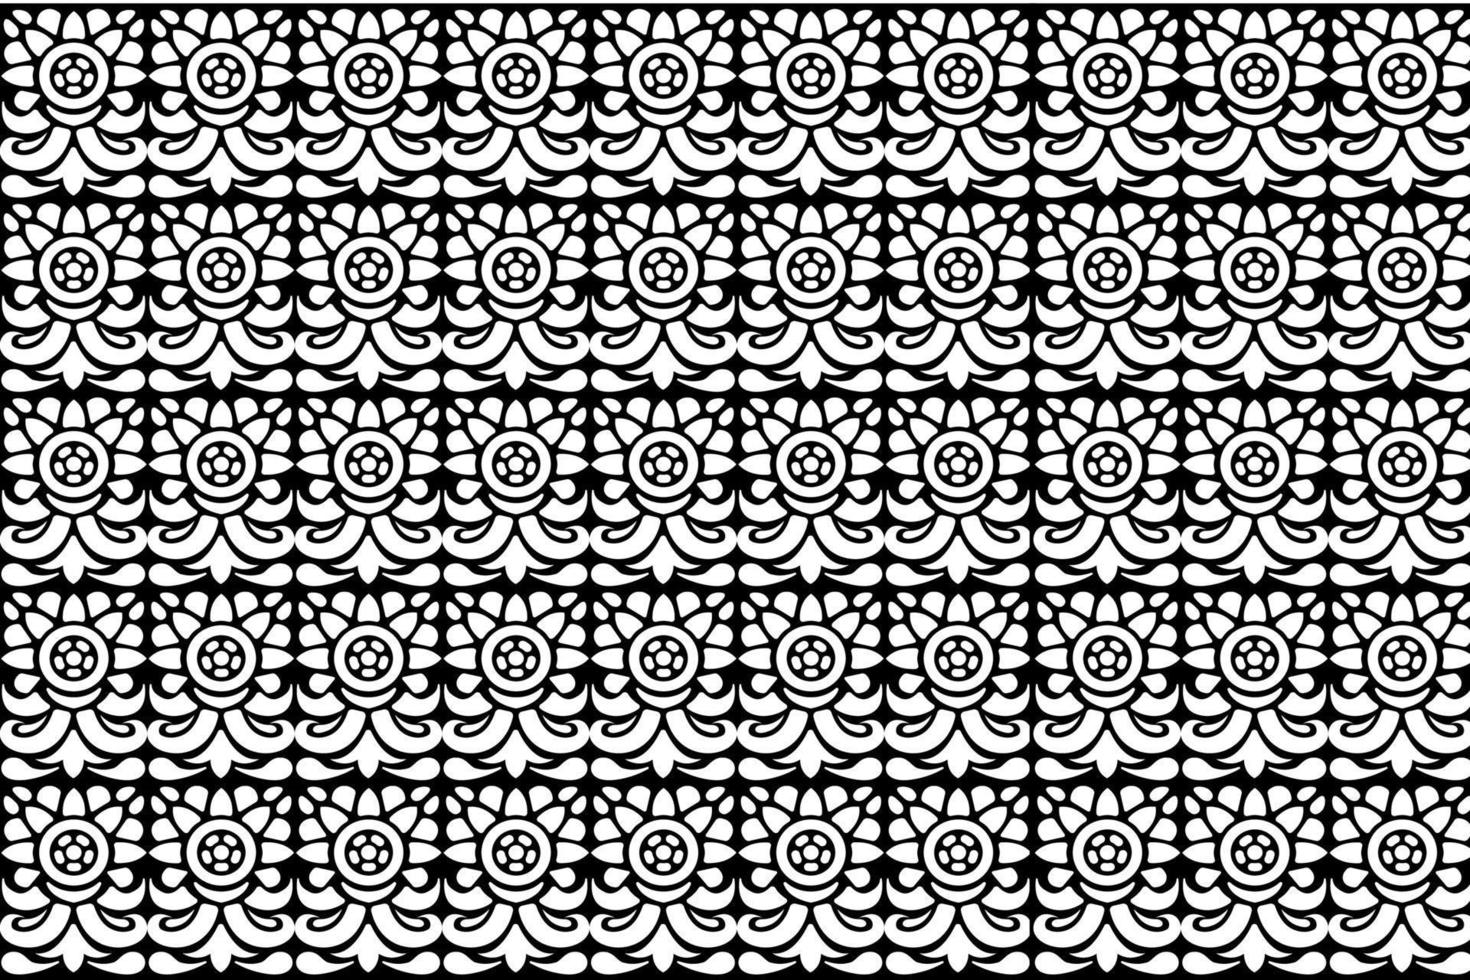 Black and white oriental pattern. Seamless repeating floral elements, background with Arabic ornament. vector